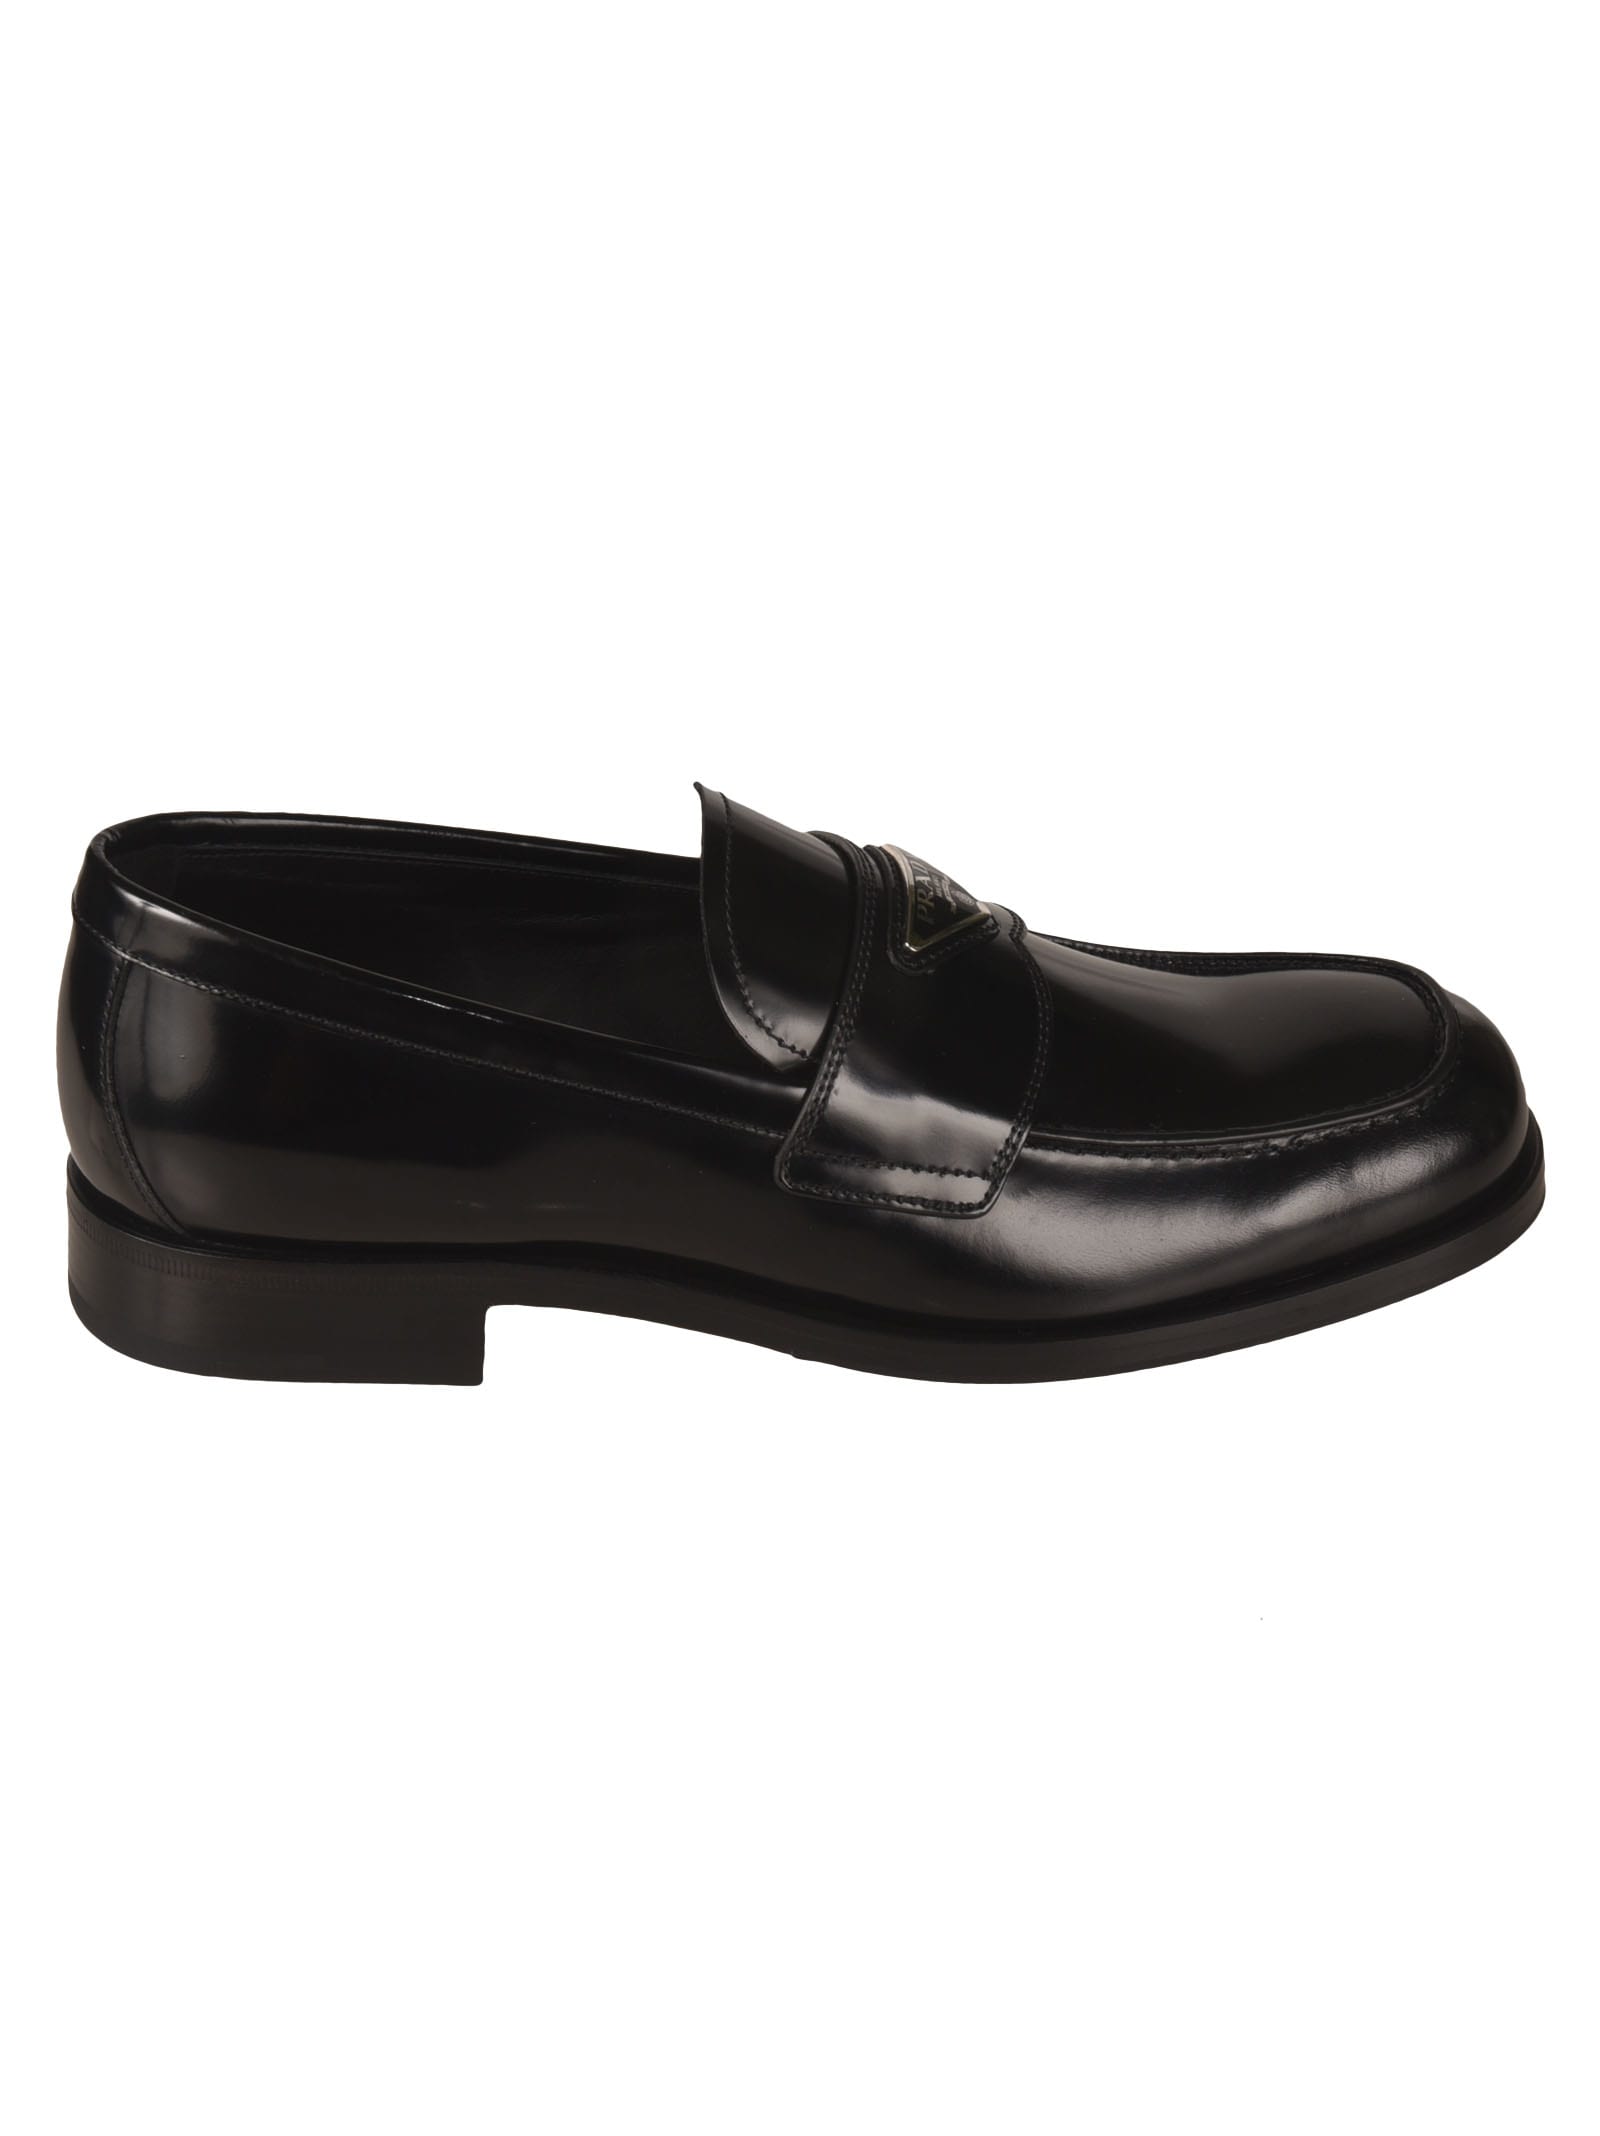 Prada Low Top Loafers